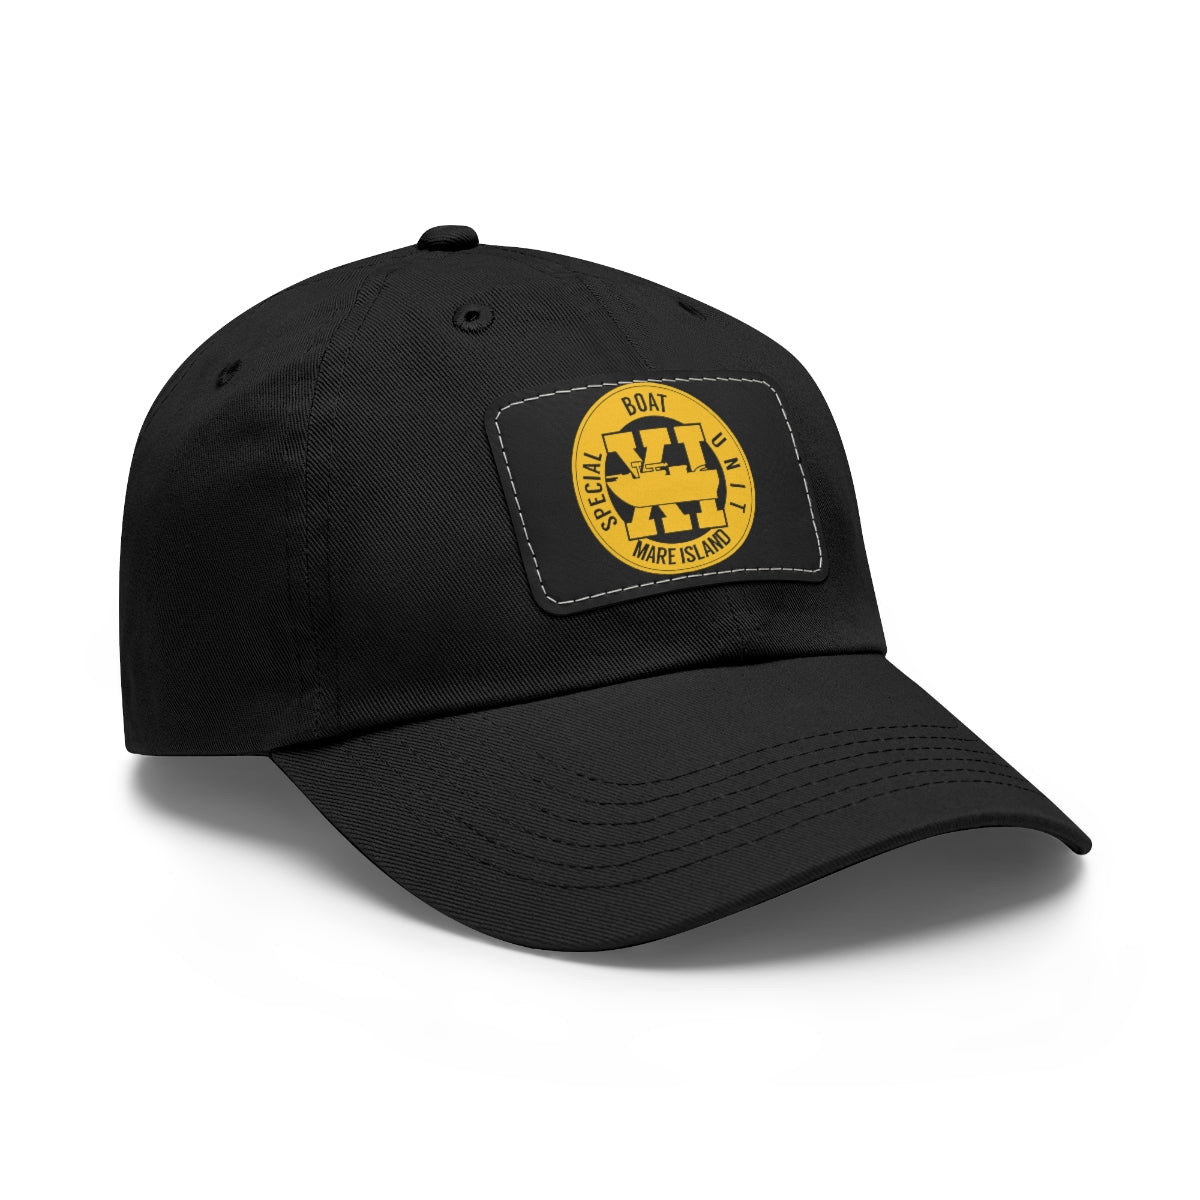 SBU 11 v2 Hat with Leather Patch (Gold)